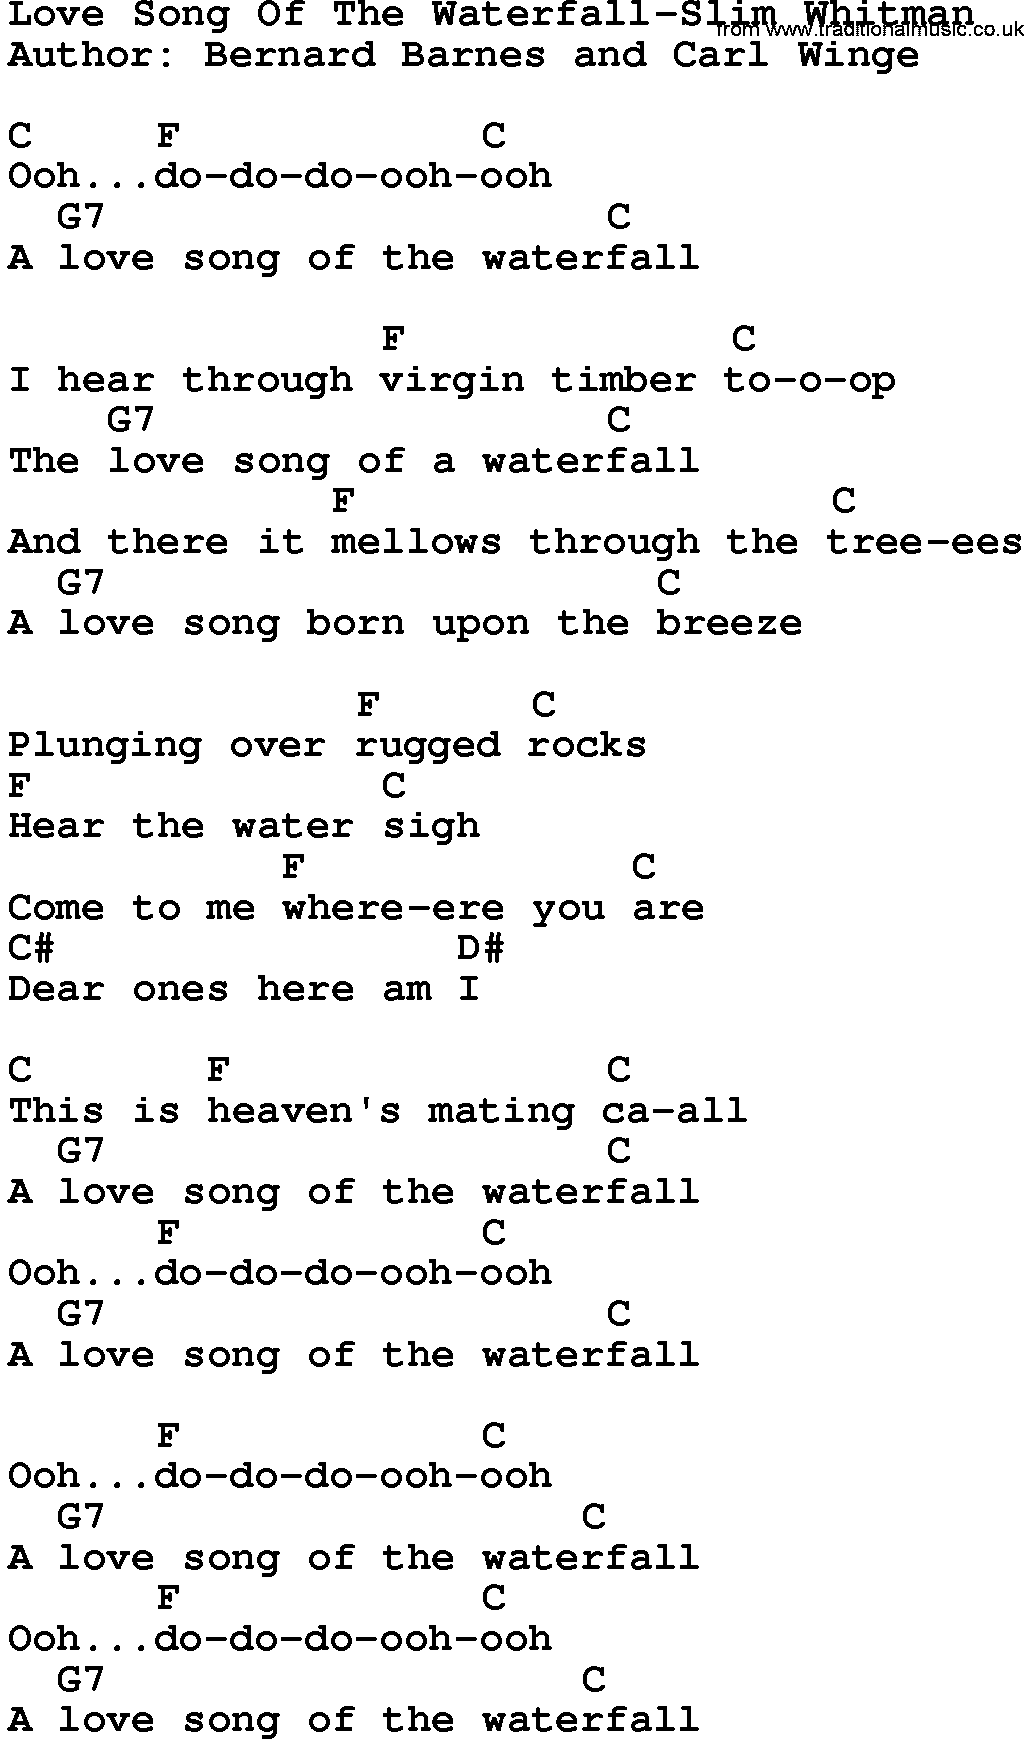 Country music song: Love Song Of The Waterfall-Slim Whitman lyrics and chords